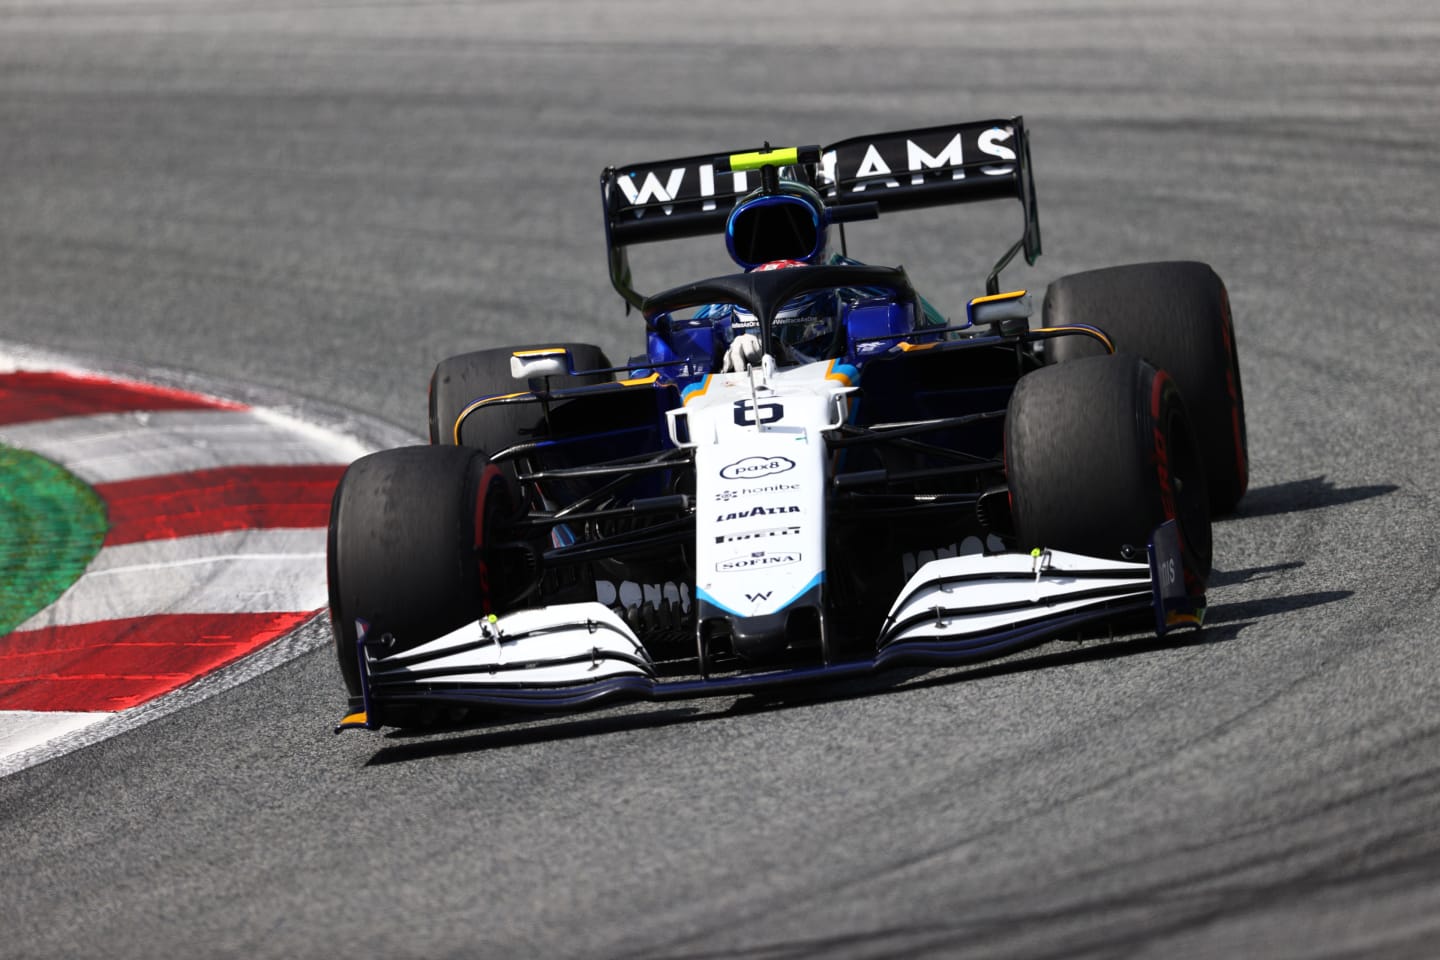 SPIELBERG, AUSTRIA - JUNE 27: Nicholas Latifi of Canada driving the (6) Williams Racing FW43B Mercedes during the F1 Grand Prix of Styria at Red Bull Ring on June 27, 2021 in Spielberg, Austria. (Photo by Clive Rose/Getty Images)